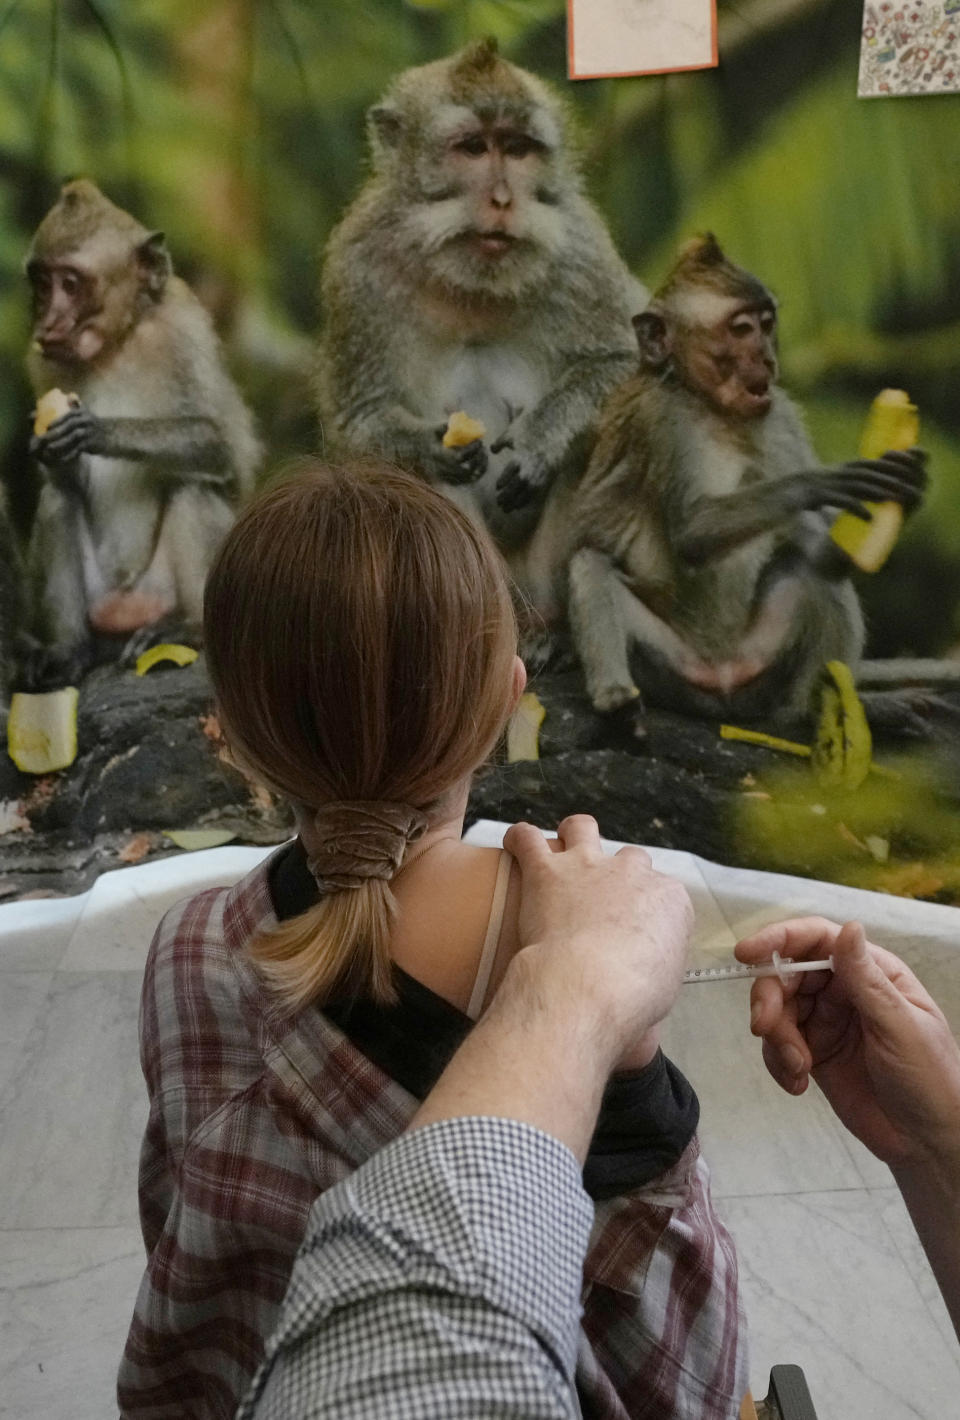 A young girl is administered a COVID-19 vaccine while she looks at photos of monkeys at the Antwerp Zoo in Antwerp, Belgium, Wednesday, Jan. 12, 2022. In an effort to make children more at ease in getting their vaccine, specially designed safari tents with photos of zoo animals have been installed to provide a more private setting with a vaccinator. Once they have received the vaccine, children and parents can stroll through the greenhouse and visit the monkey enclosure. (AP Photo/Virginia Mayo)